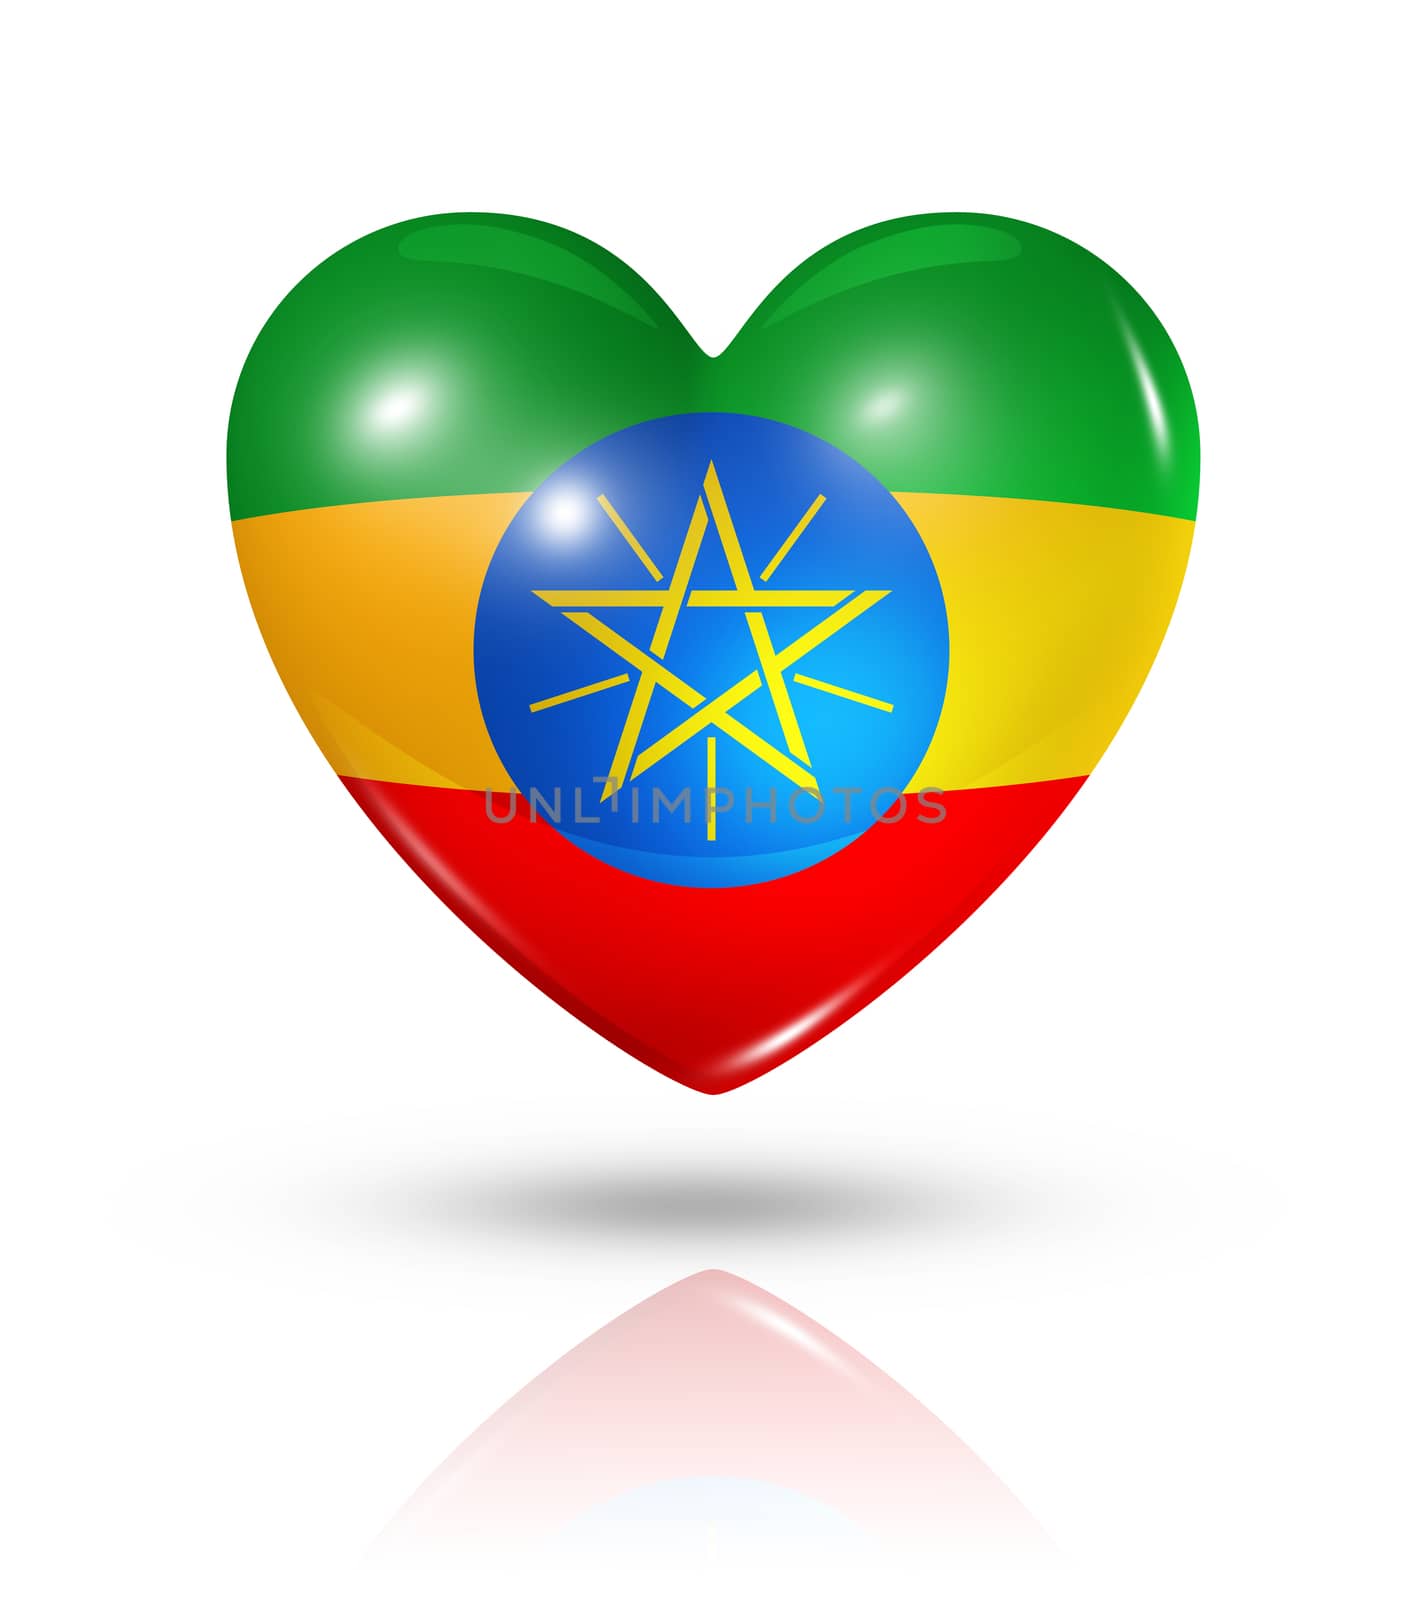 Love Ethiopia, heart flag icon by daboost